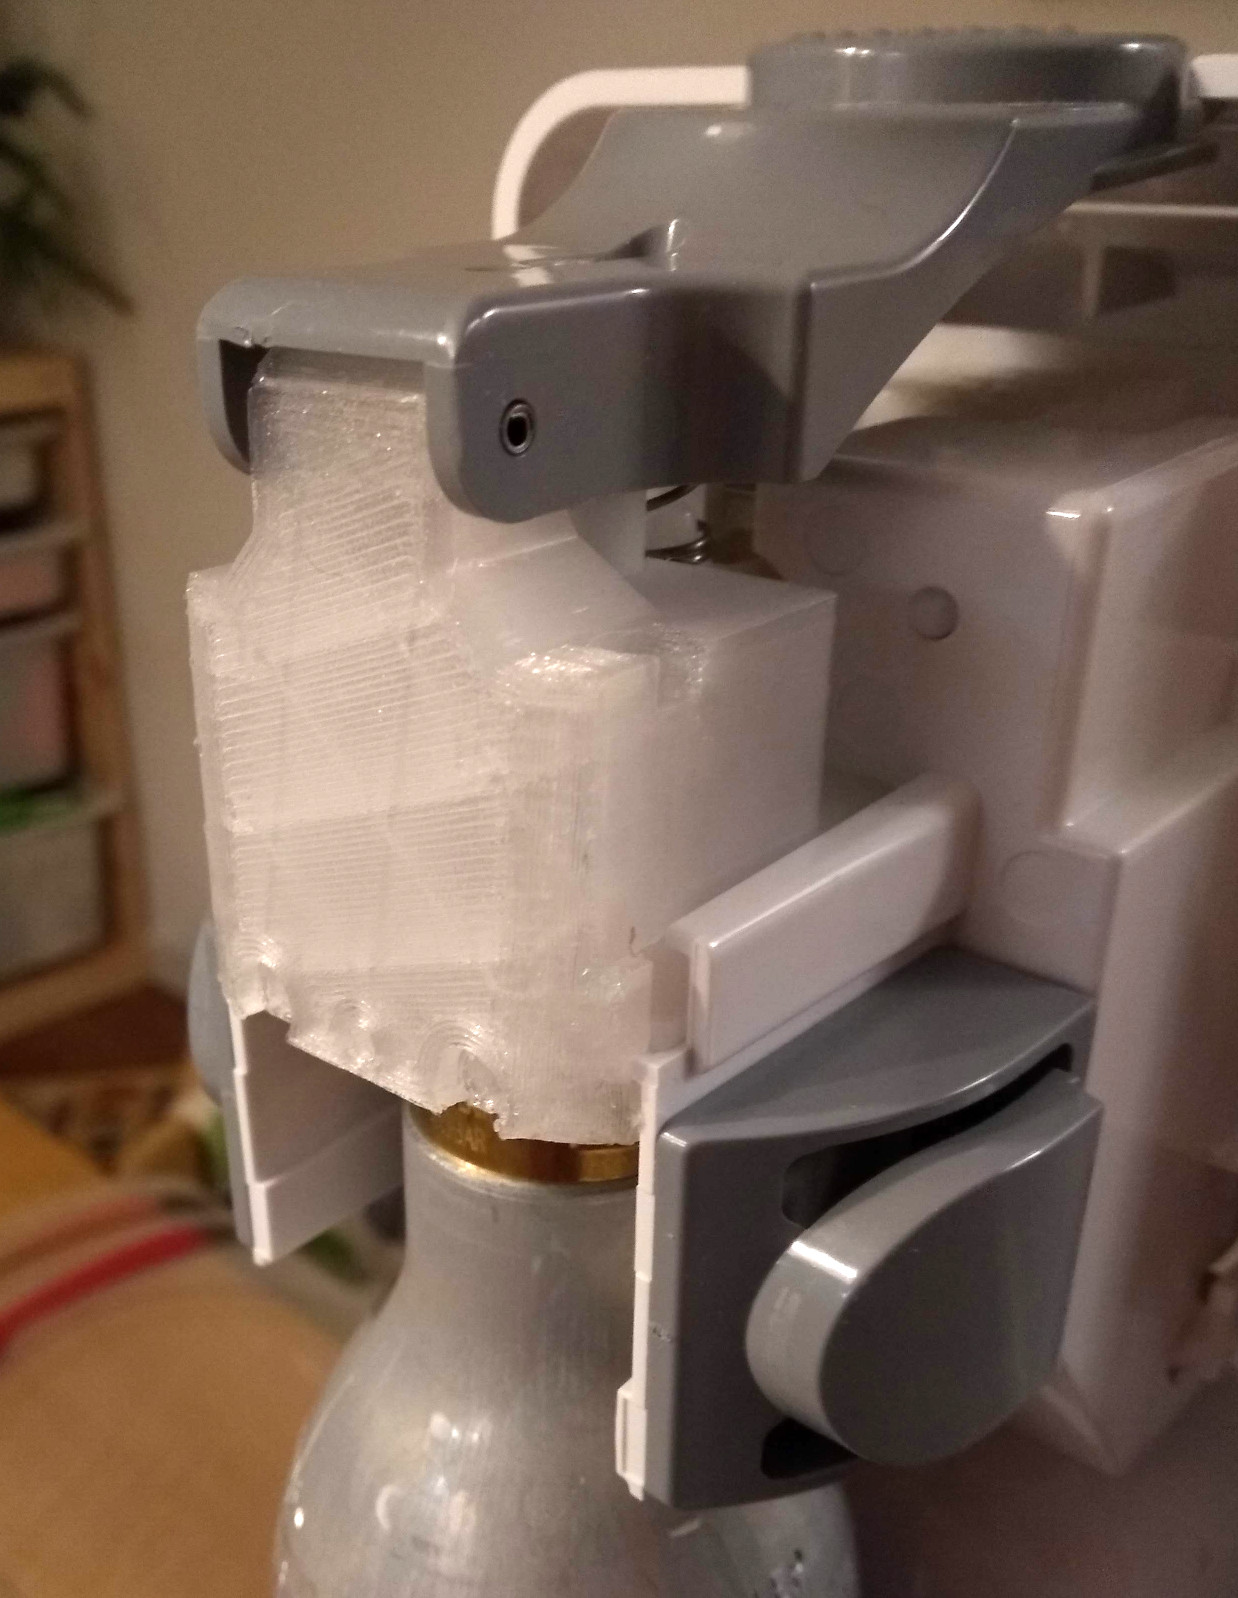 Sodastream 'Cool' Button Hinge replacement